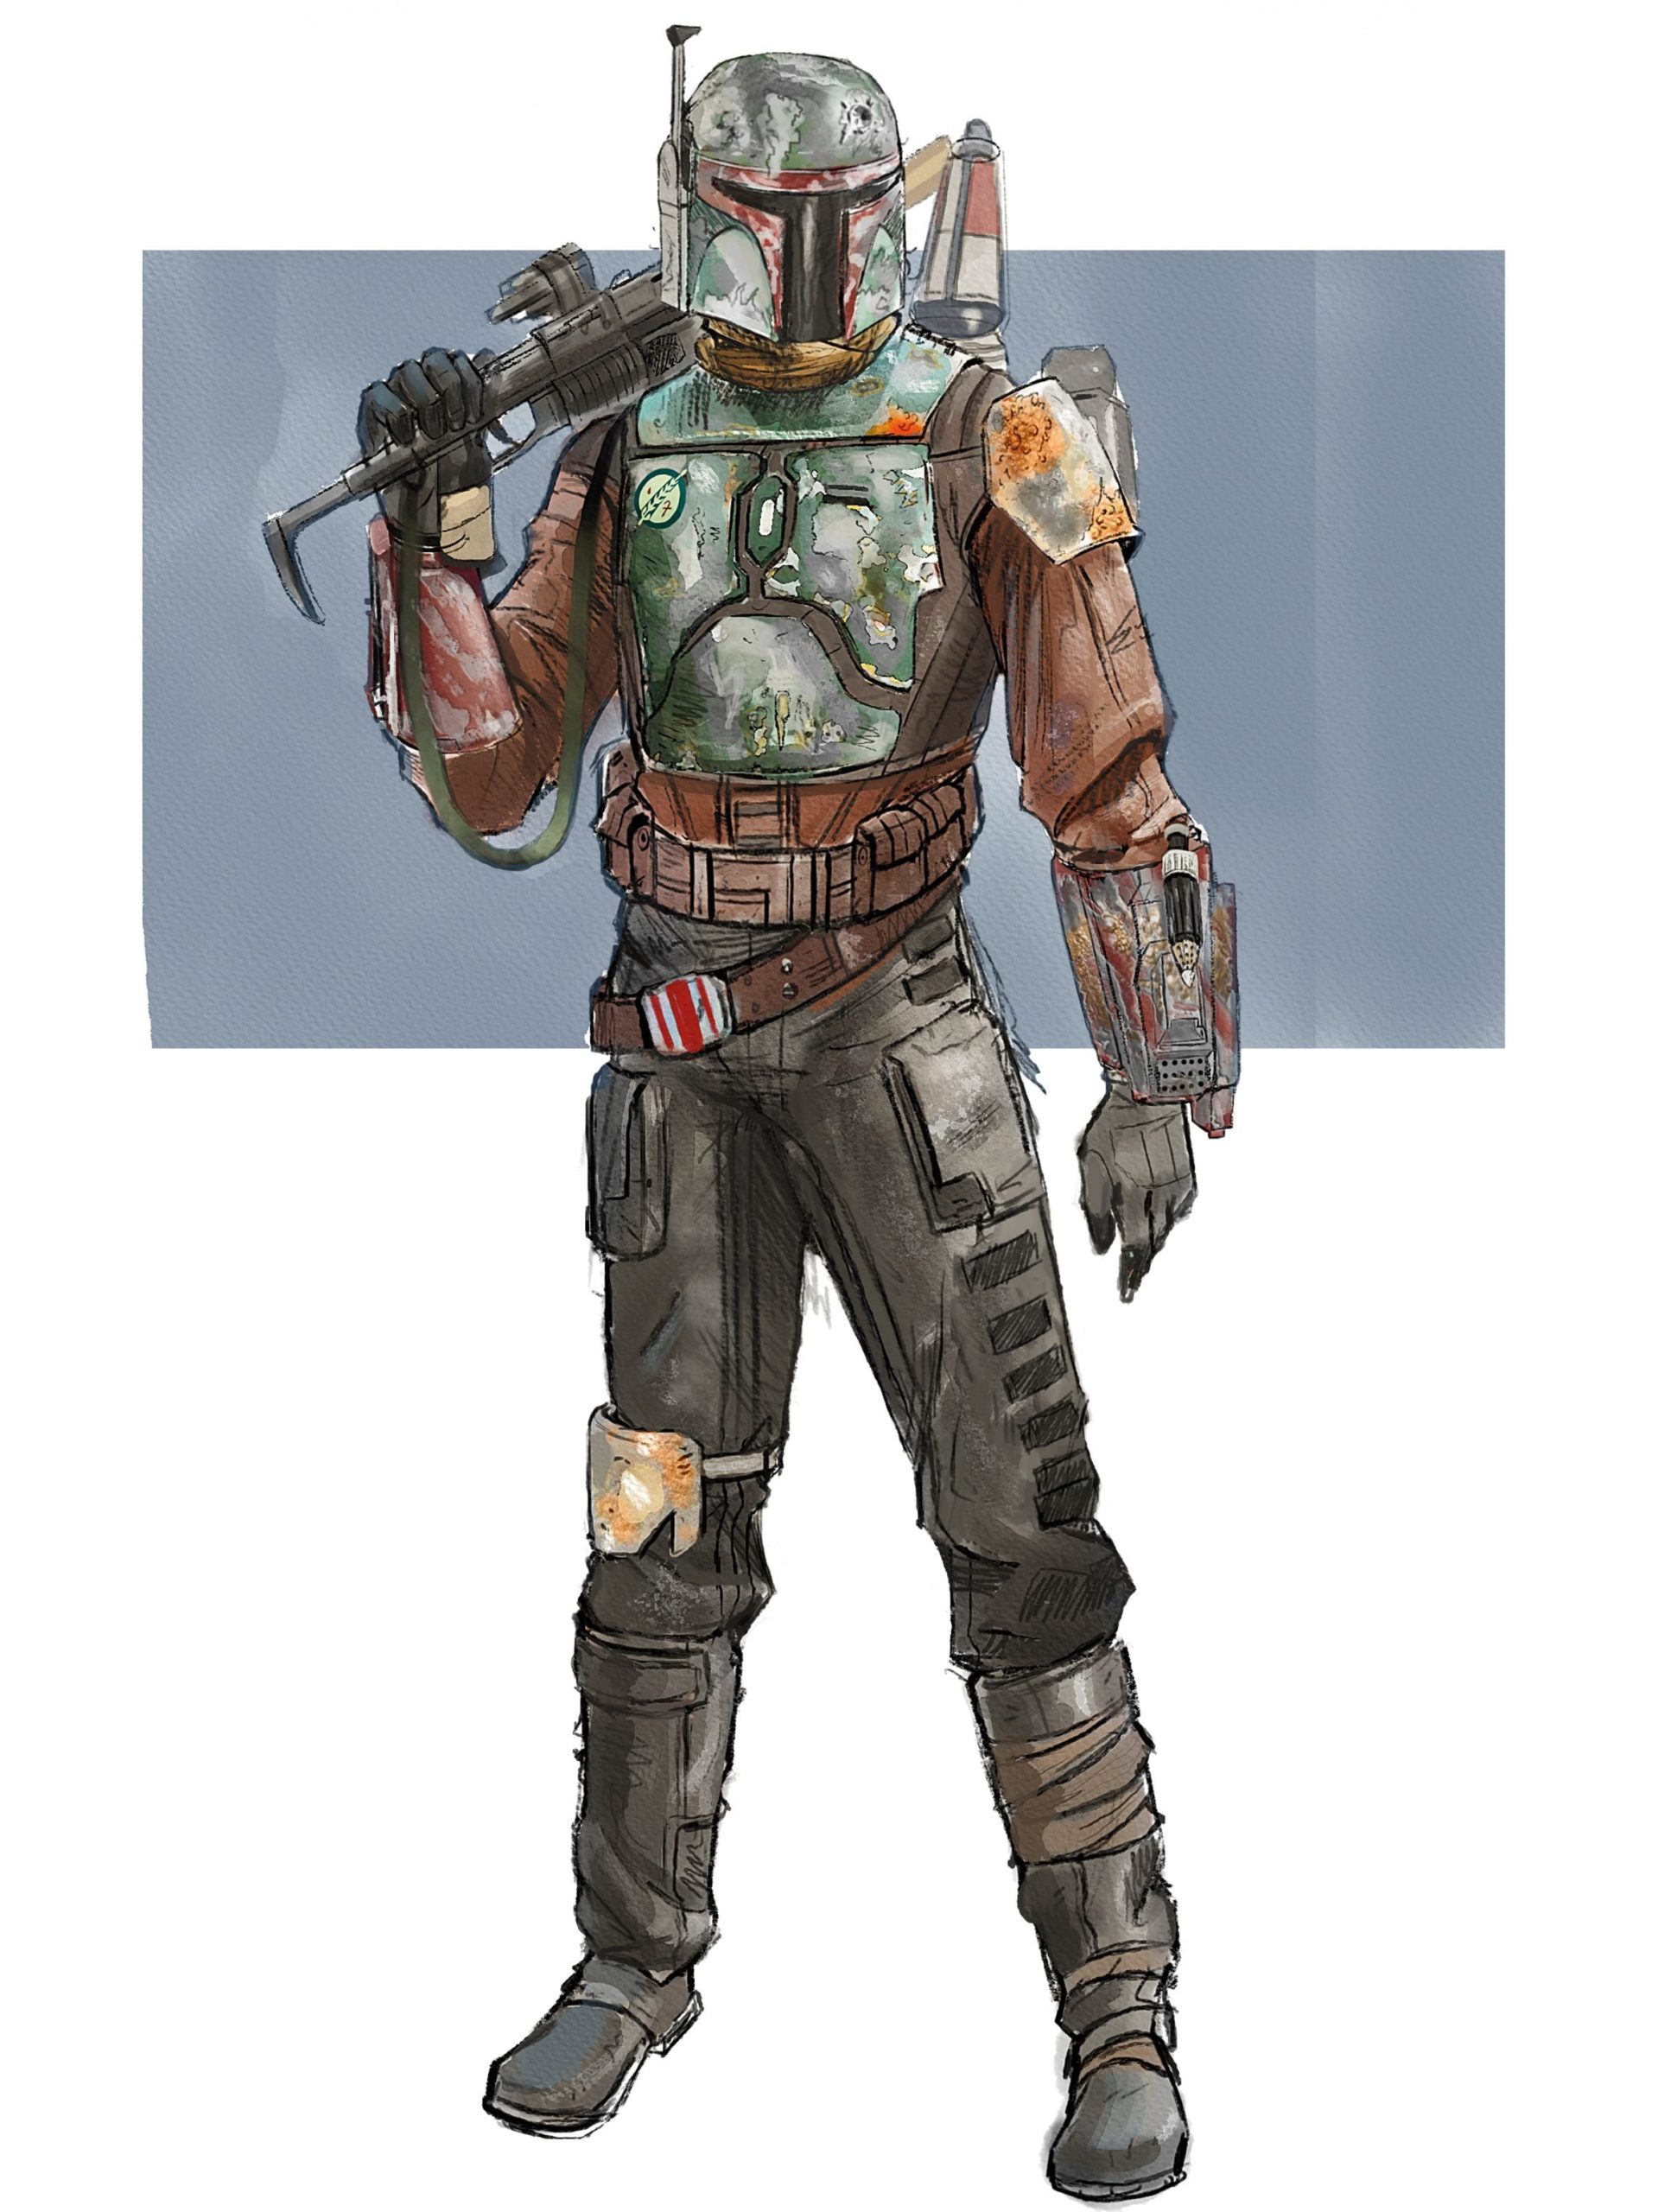 Art by Doug Chiang. From The Art of Star Wars: The Mandalorian (Season Two) courtesy of Lucasfilm (Image: Abrams Books/Lucasfilm)